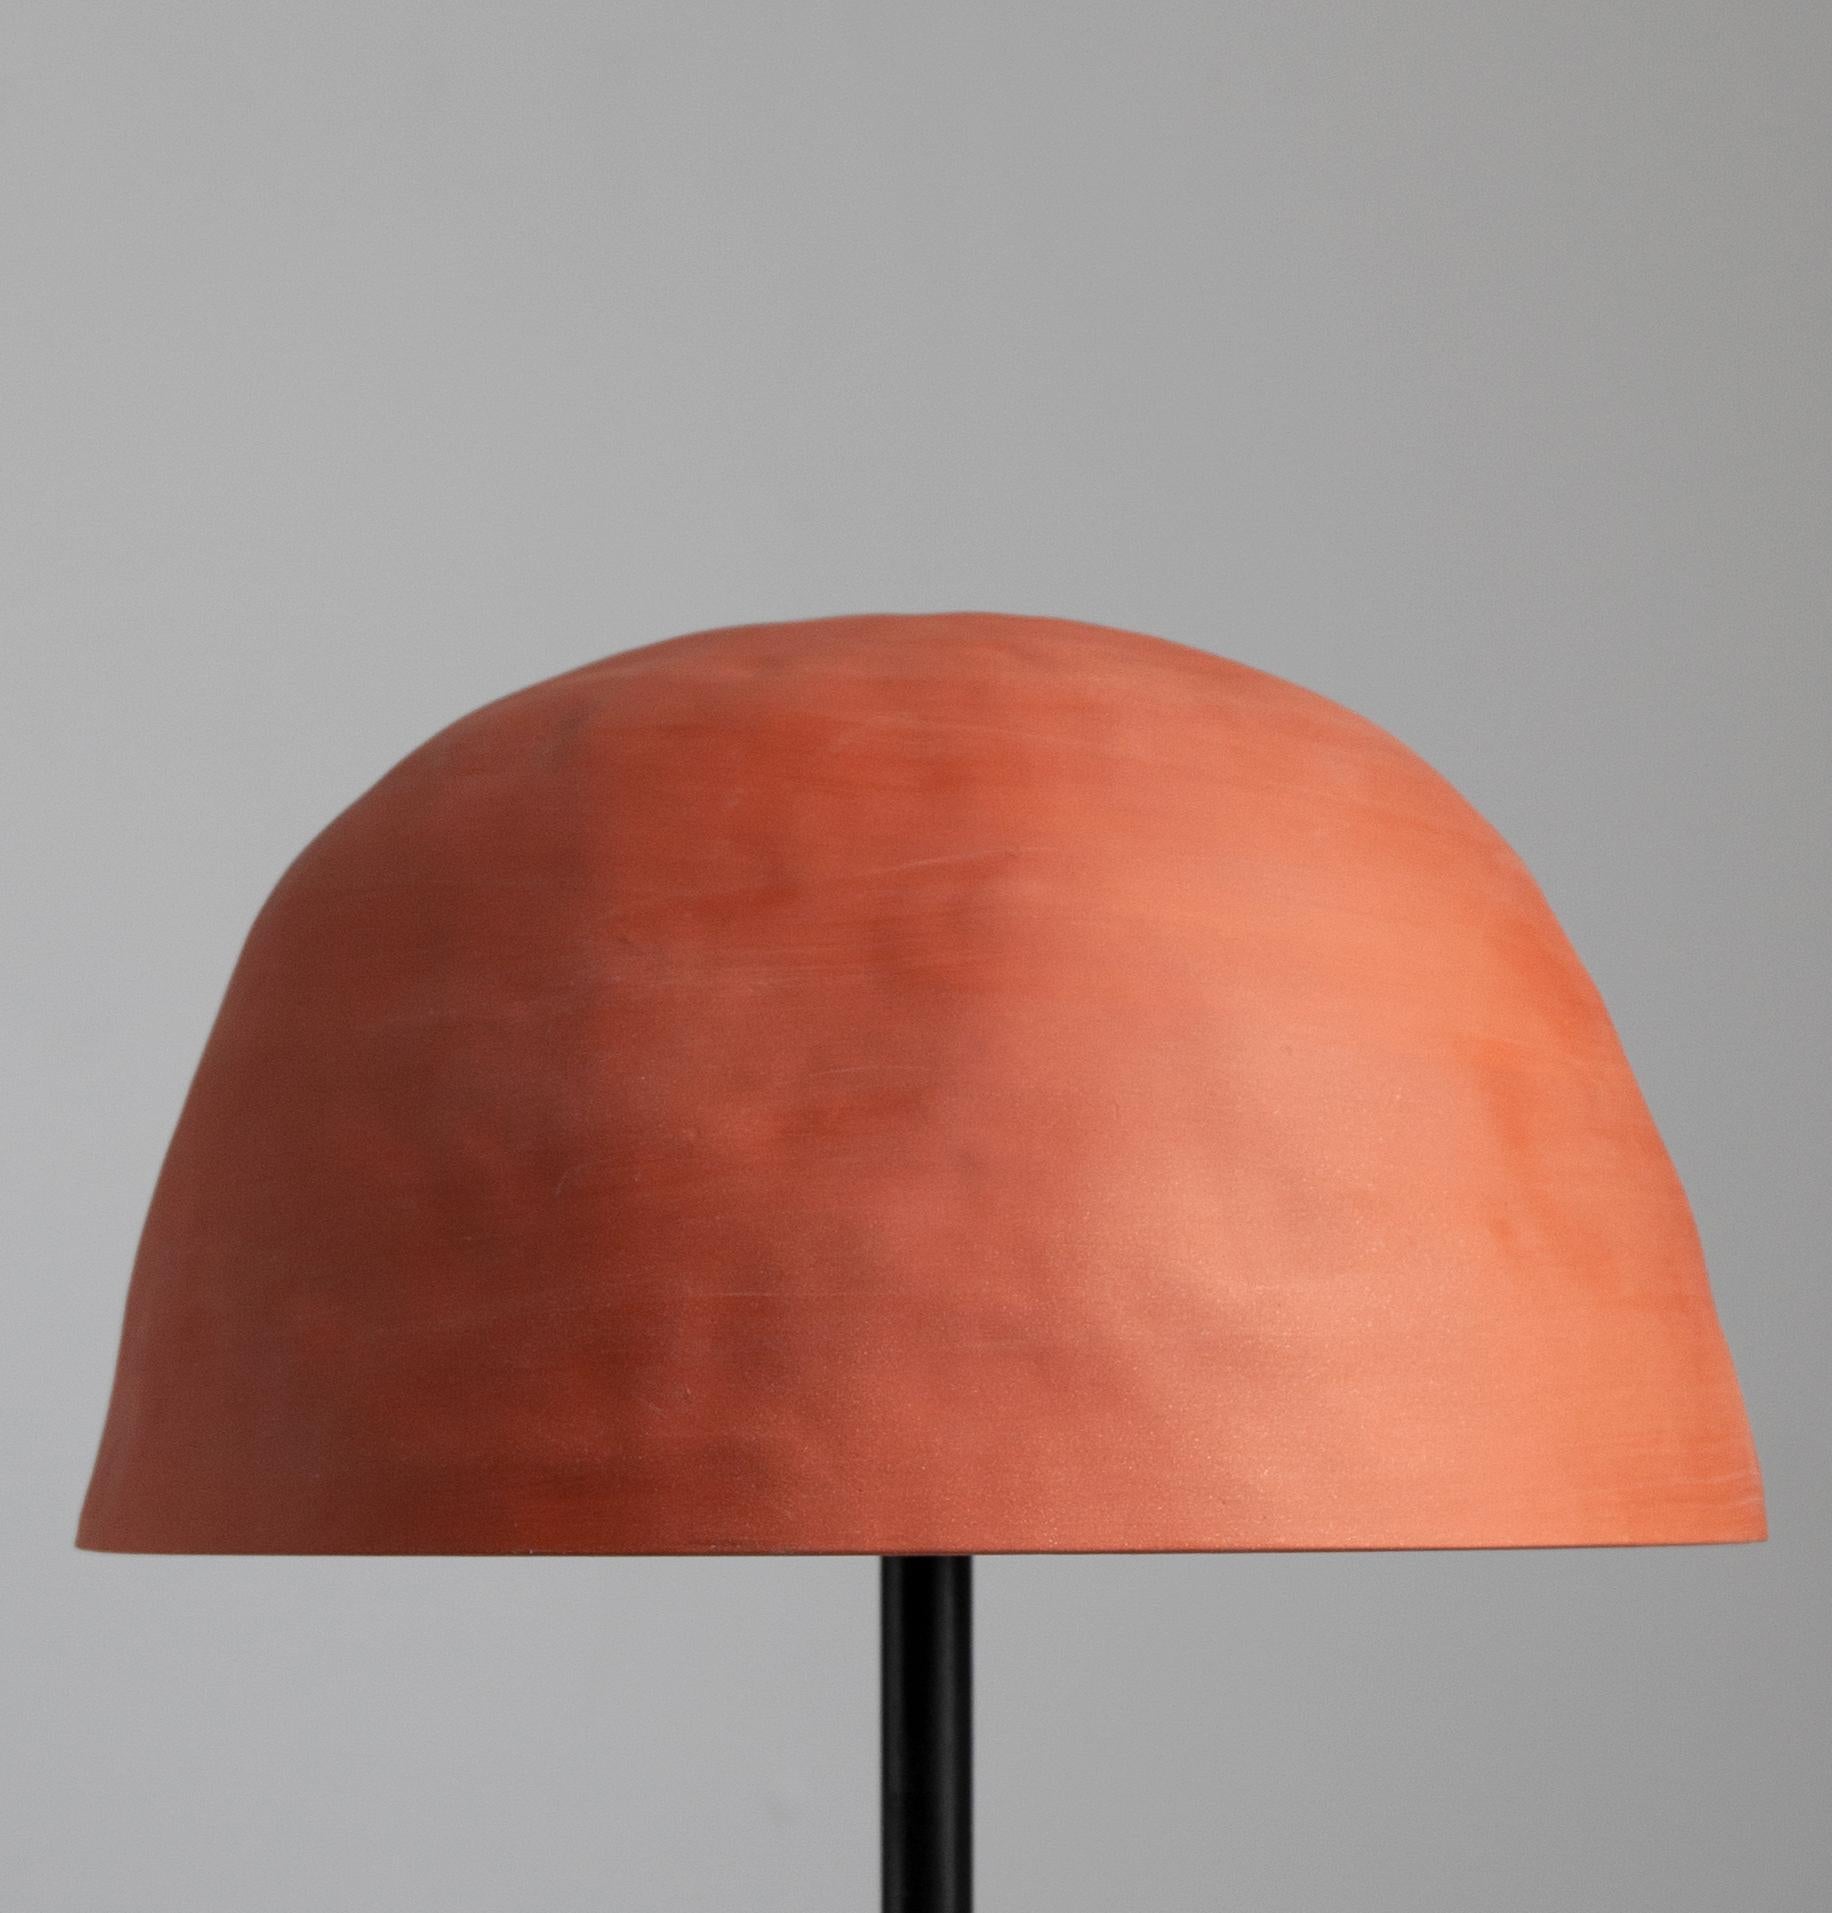 Dome Ceramic Table Lamp With Tan Or, Lechee Sandstone Table Lamp